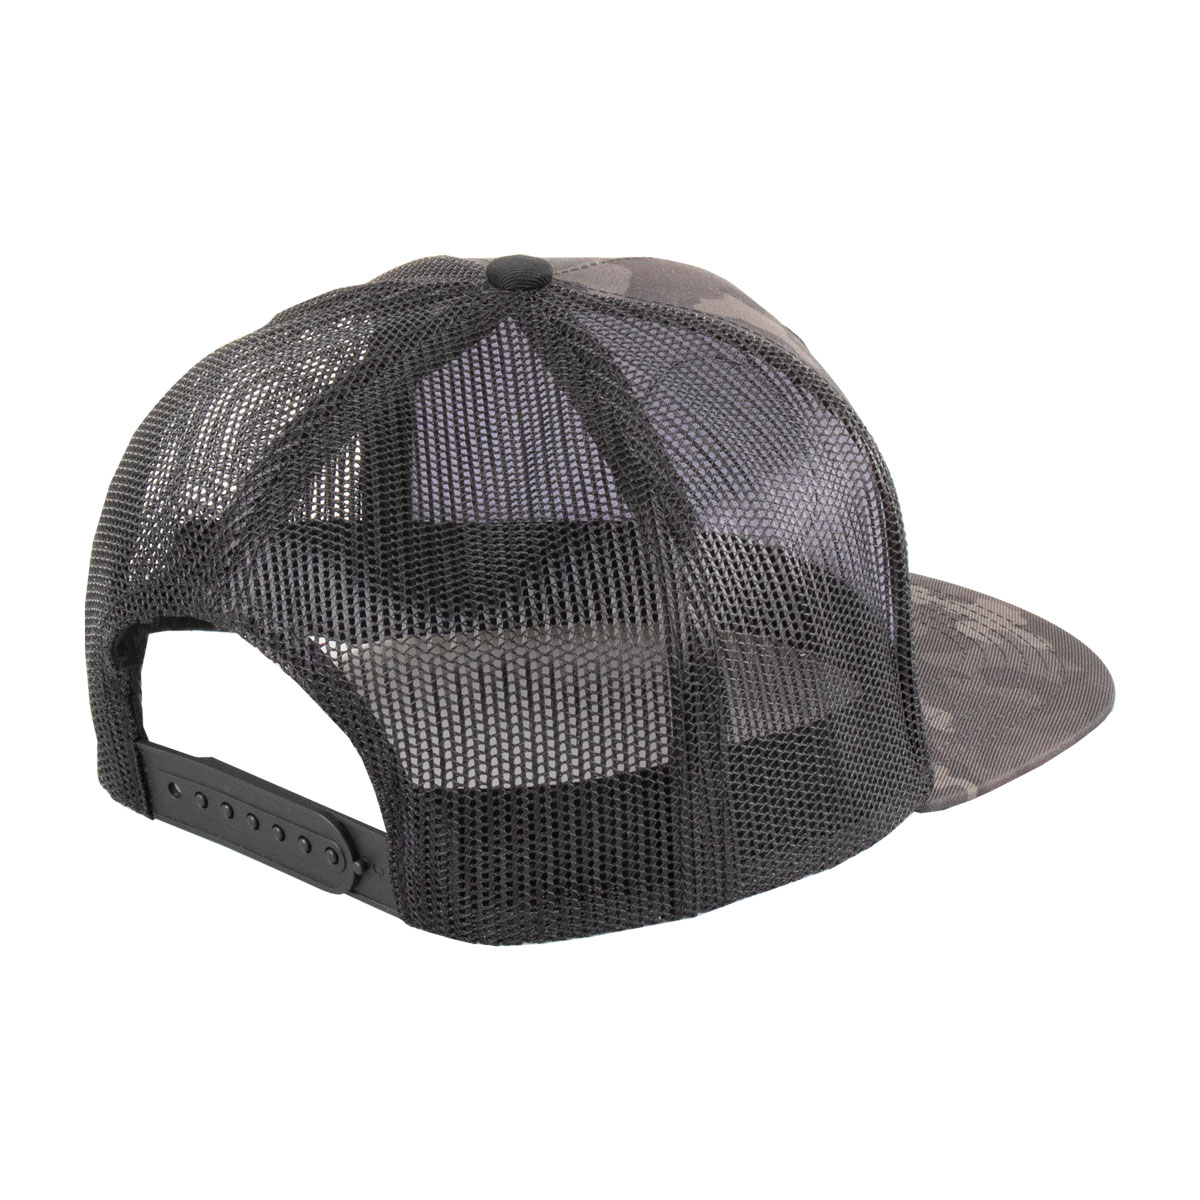 Synergy Digi Camo Synergy Branded Leather Patch Trucker Hat